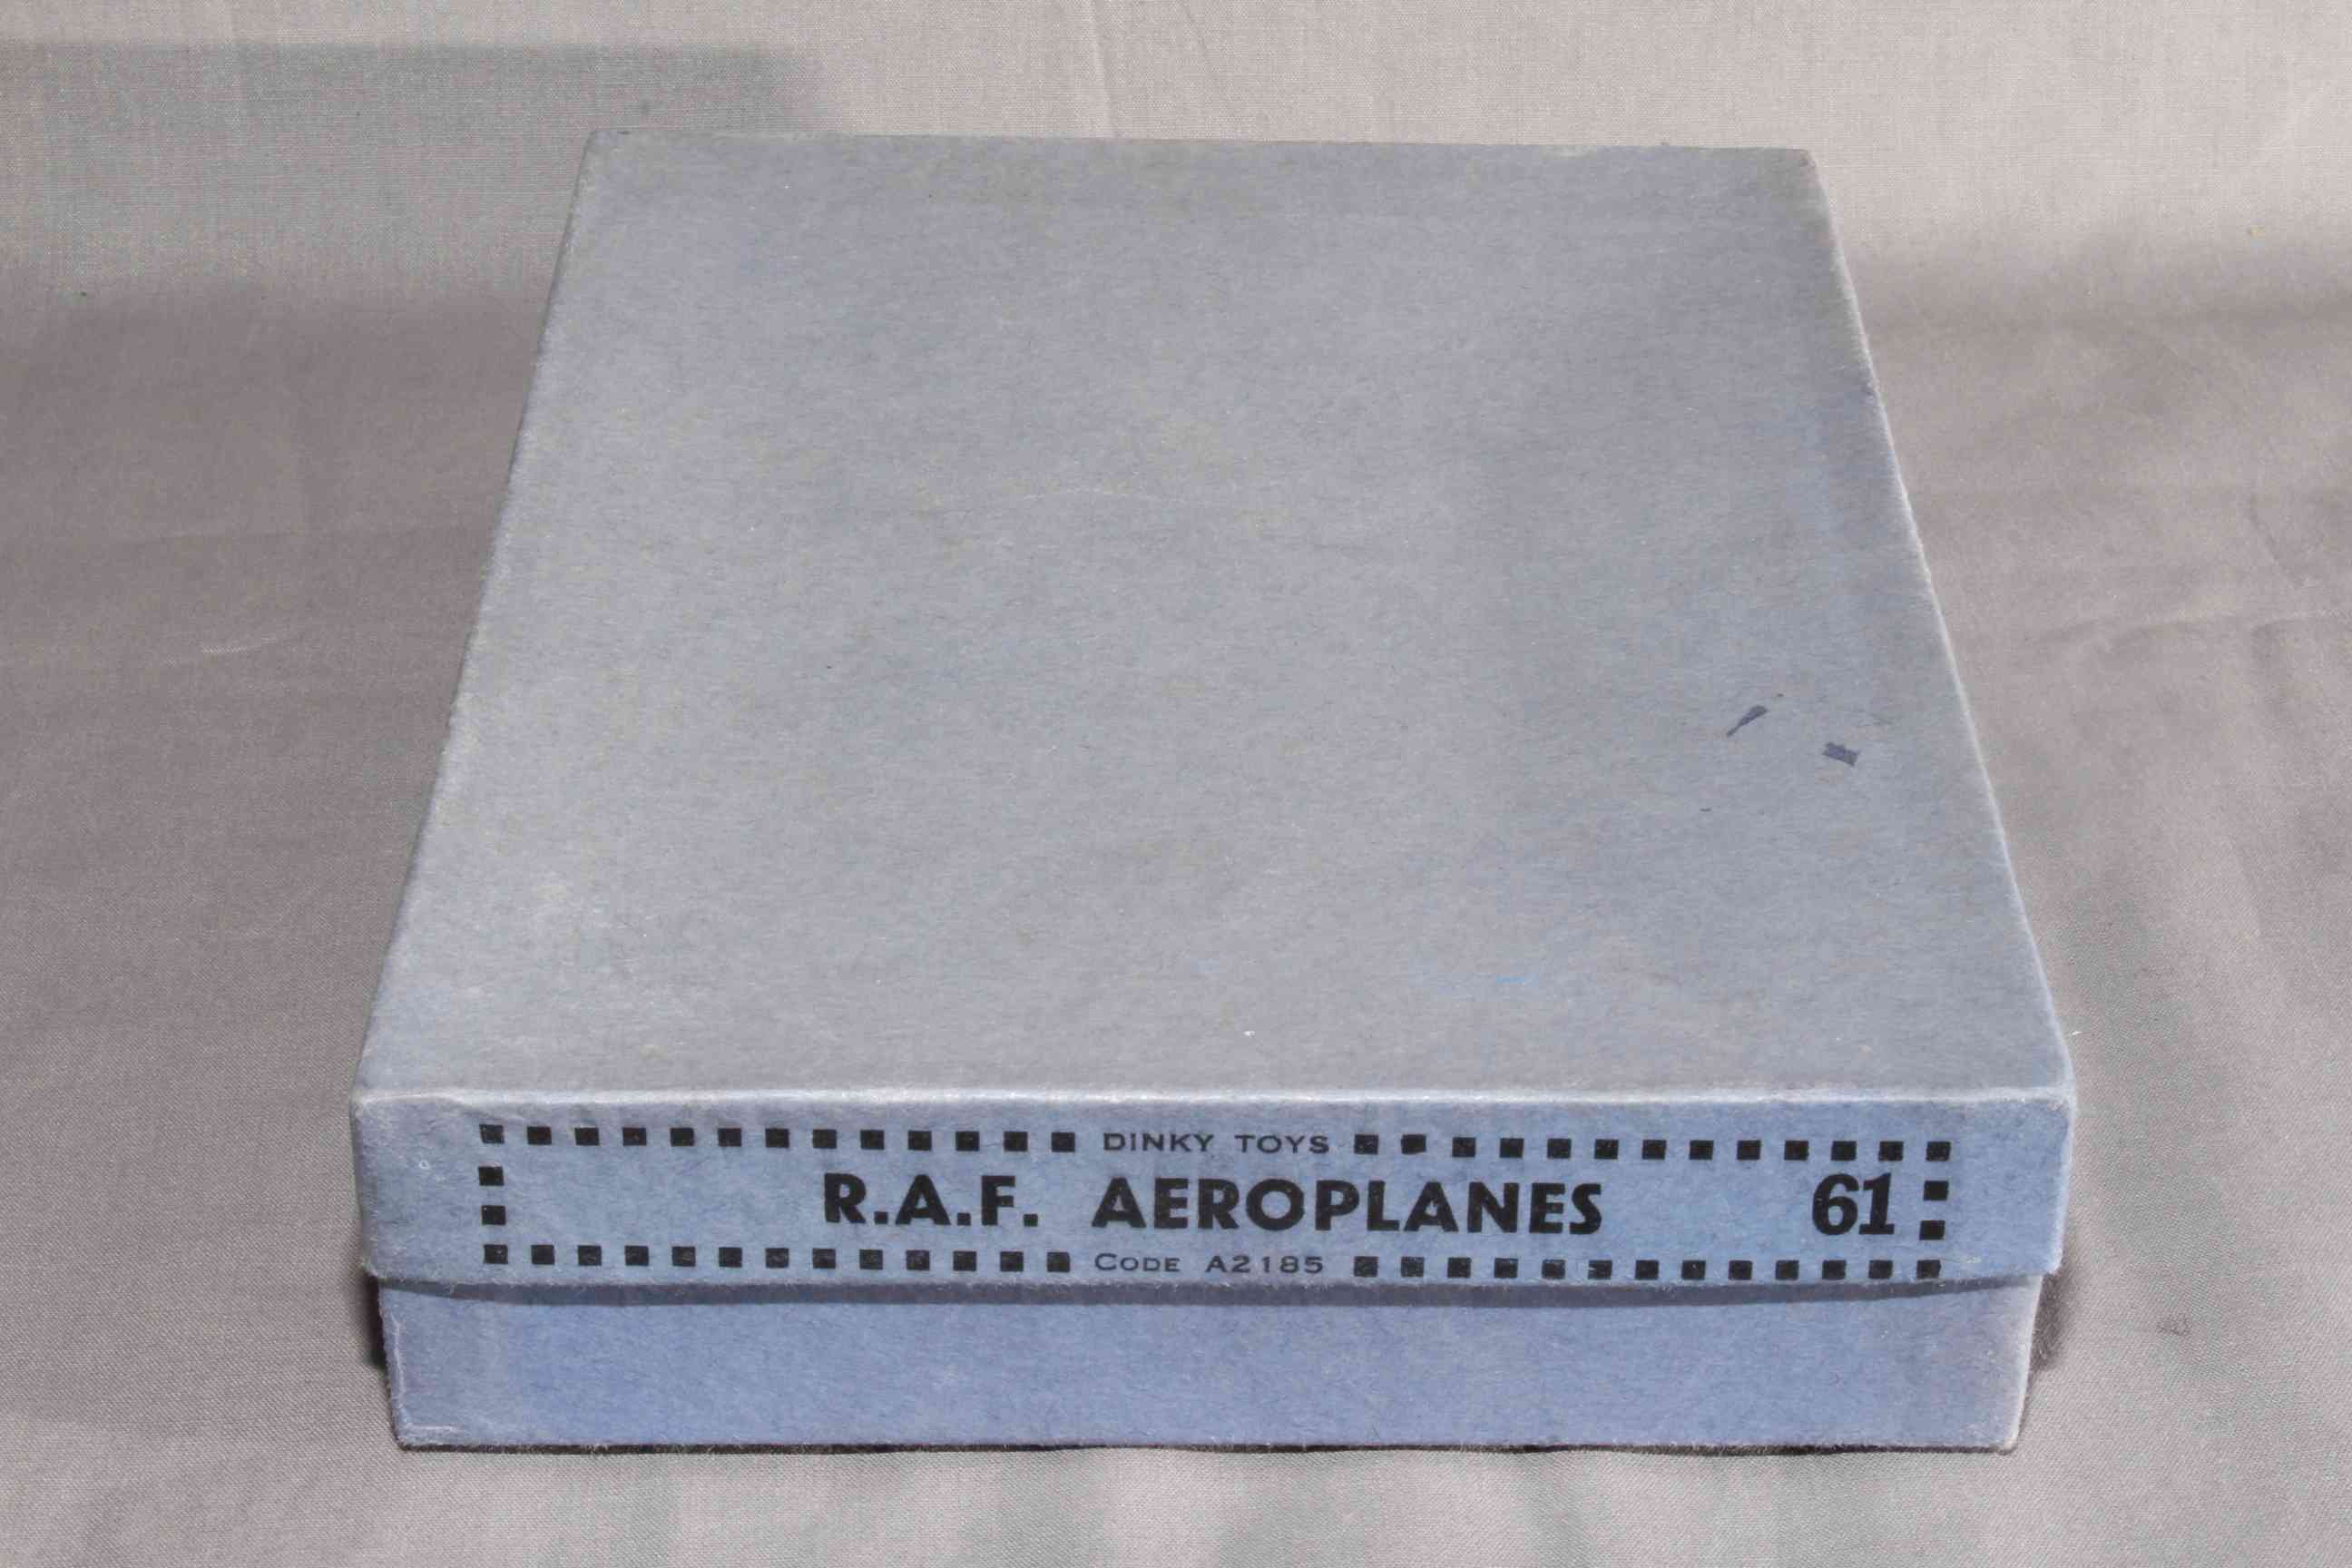 Pre War Dinky Empty Box for Gift Set 61 RAF Aeroplanes complete with inner string mount plinth.